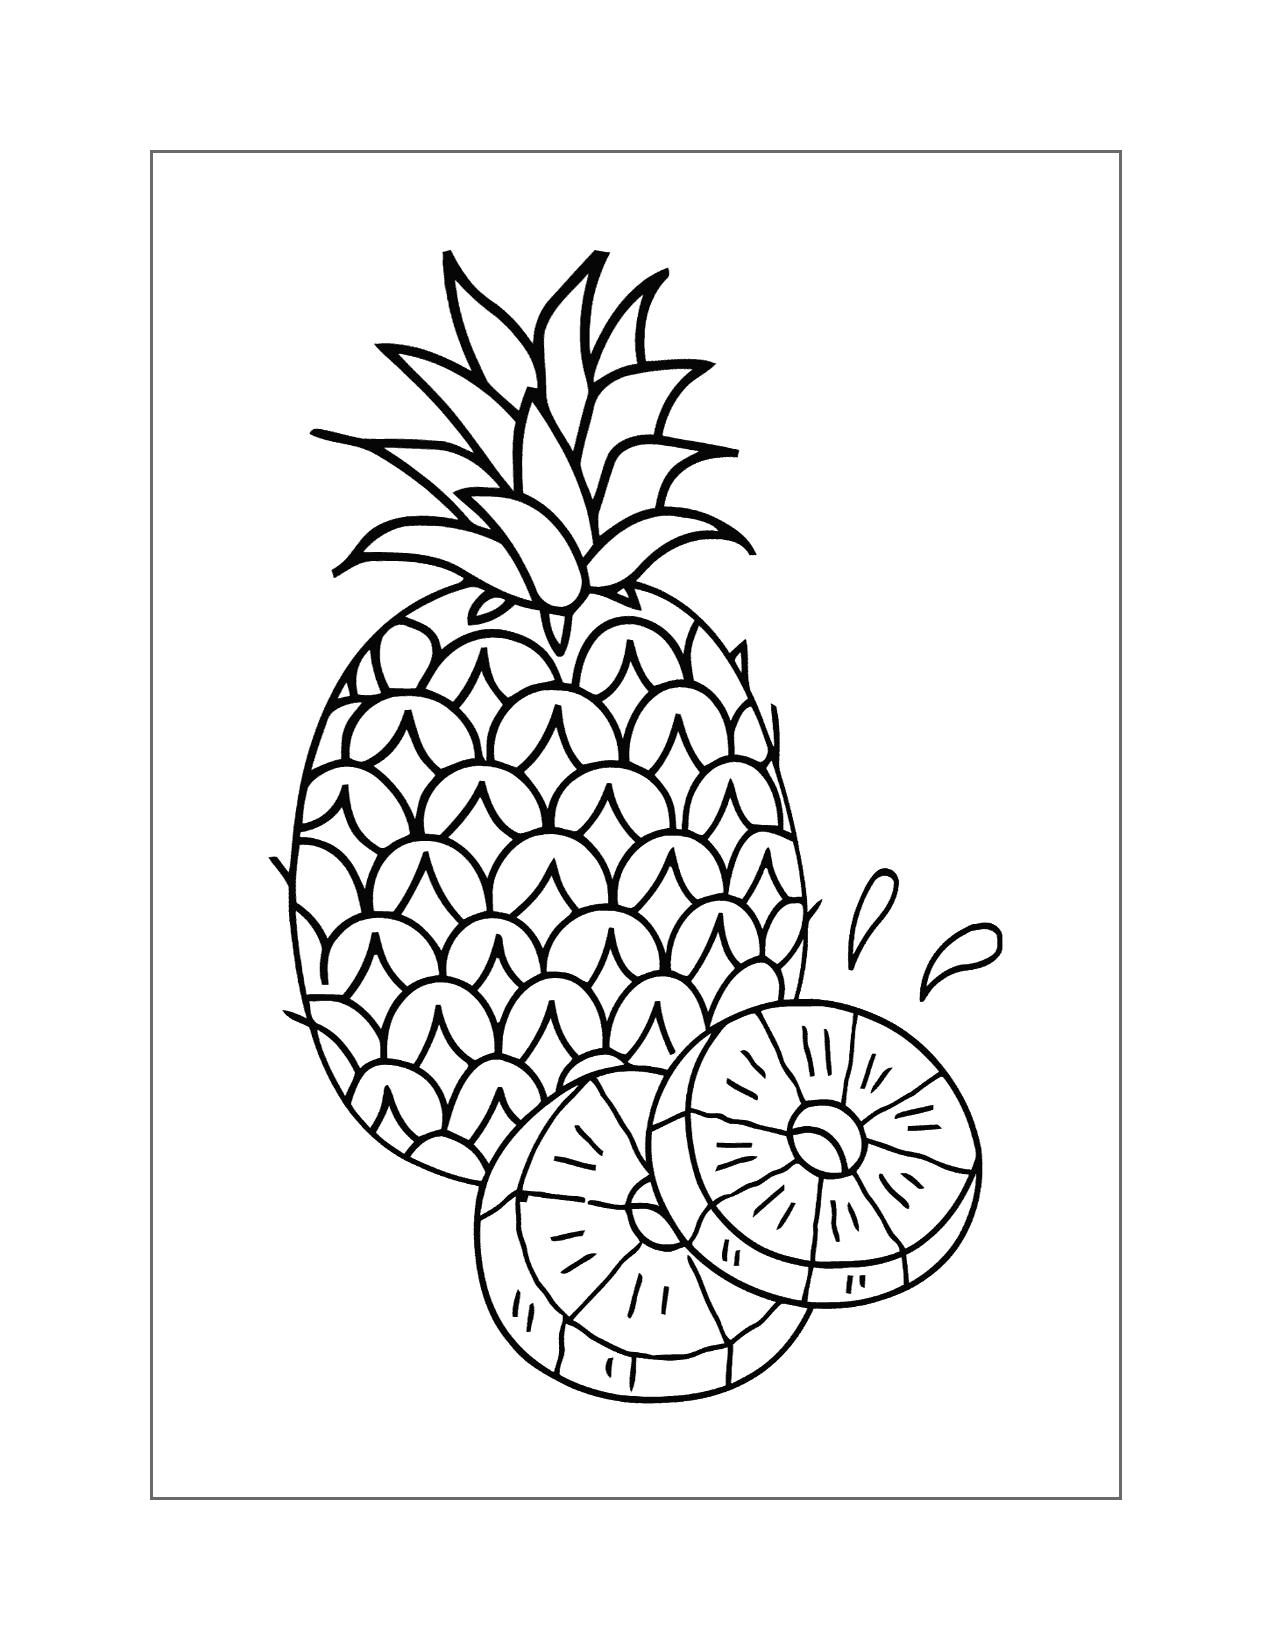 Pineapple Slices Coloring Page